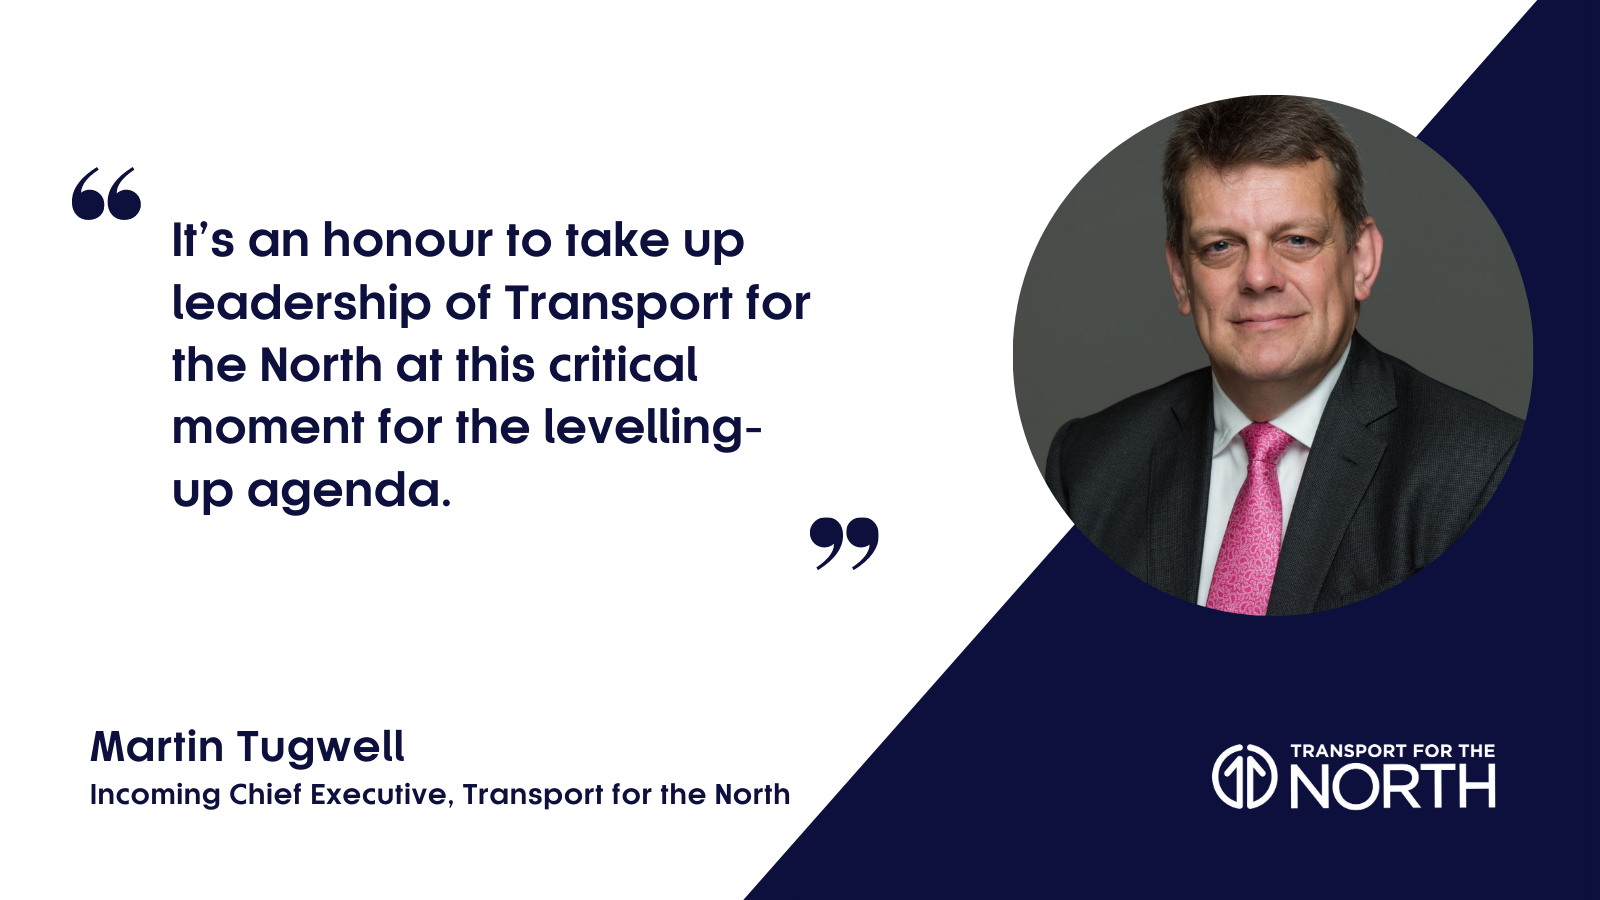 Comment by incoming Chief Executive of Transport for the North Martin Tugwell